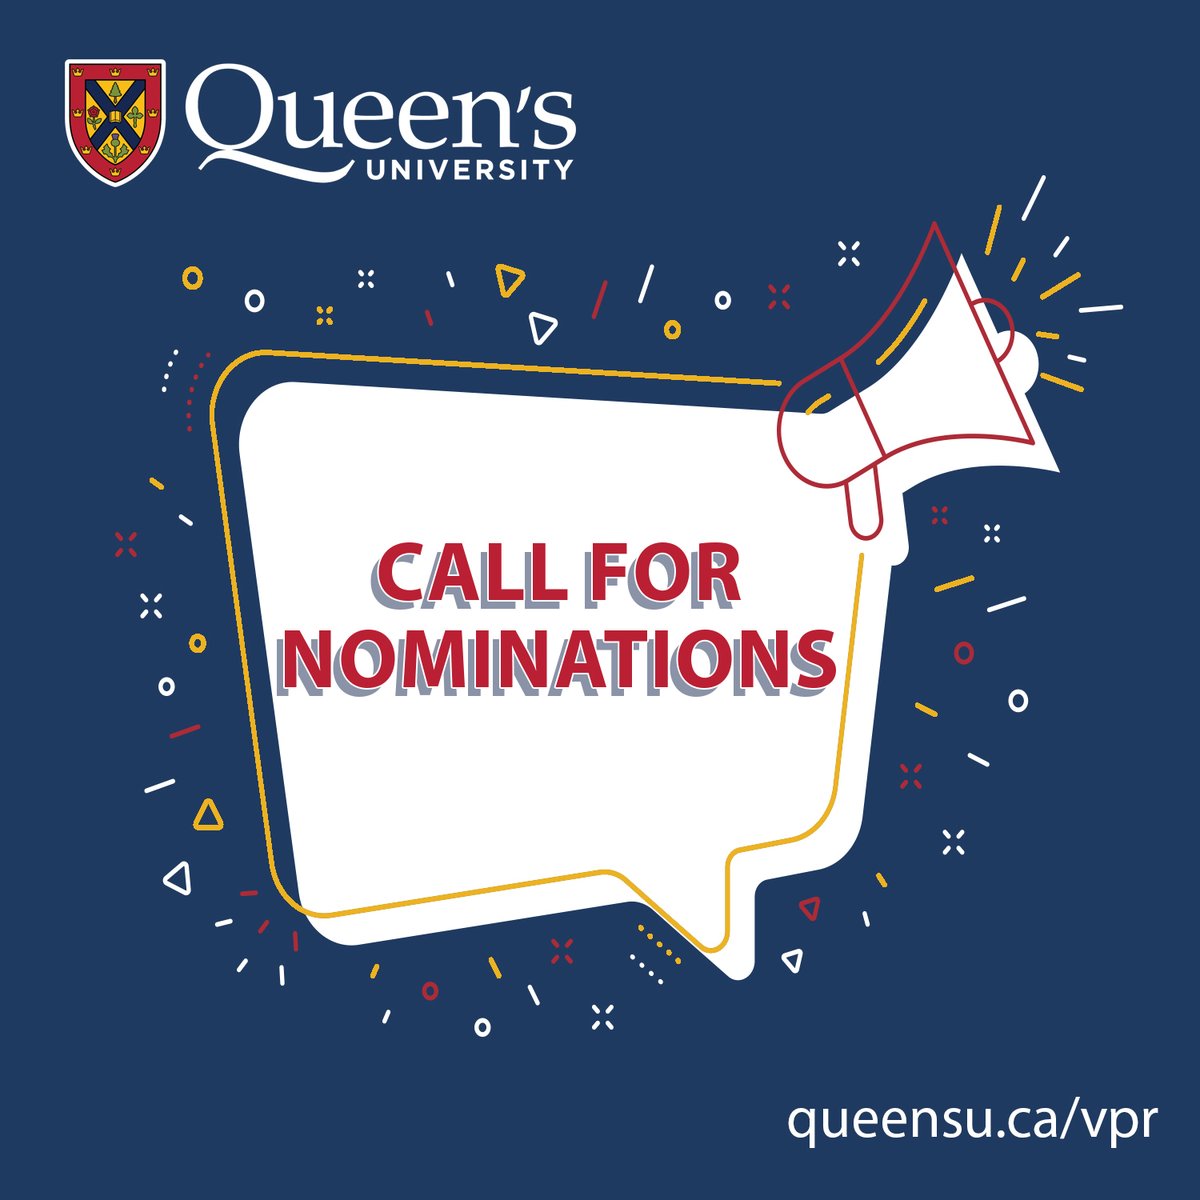 The Vice-Principal Research Portfolio is accepting nominations for three awards this Fall: - Royal Society of Canada Fellowship and College of New Scholars, Artists and Scientists - Sloan Research Fellowships - WiSTEM2D Scholars Award Program Apply at queensu.ca/vpr/news/fall-…